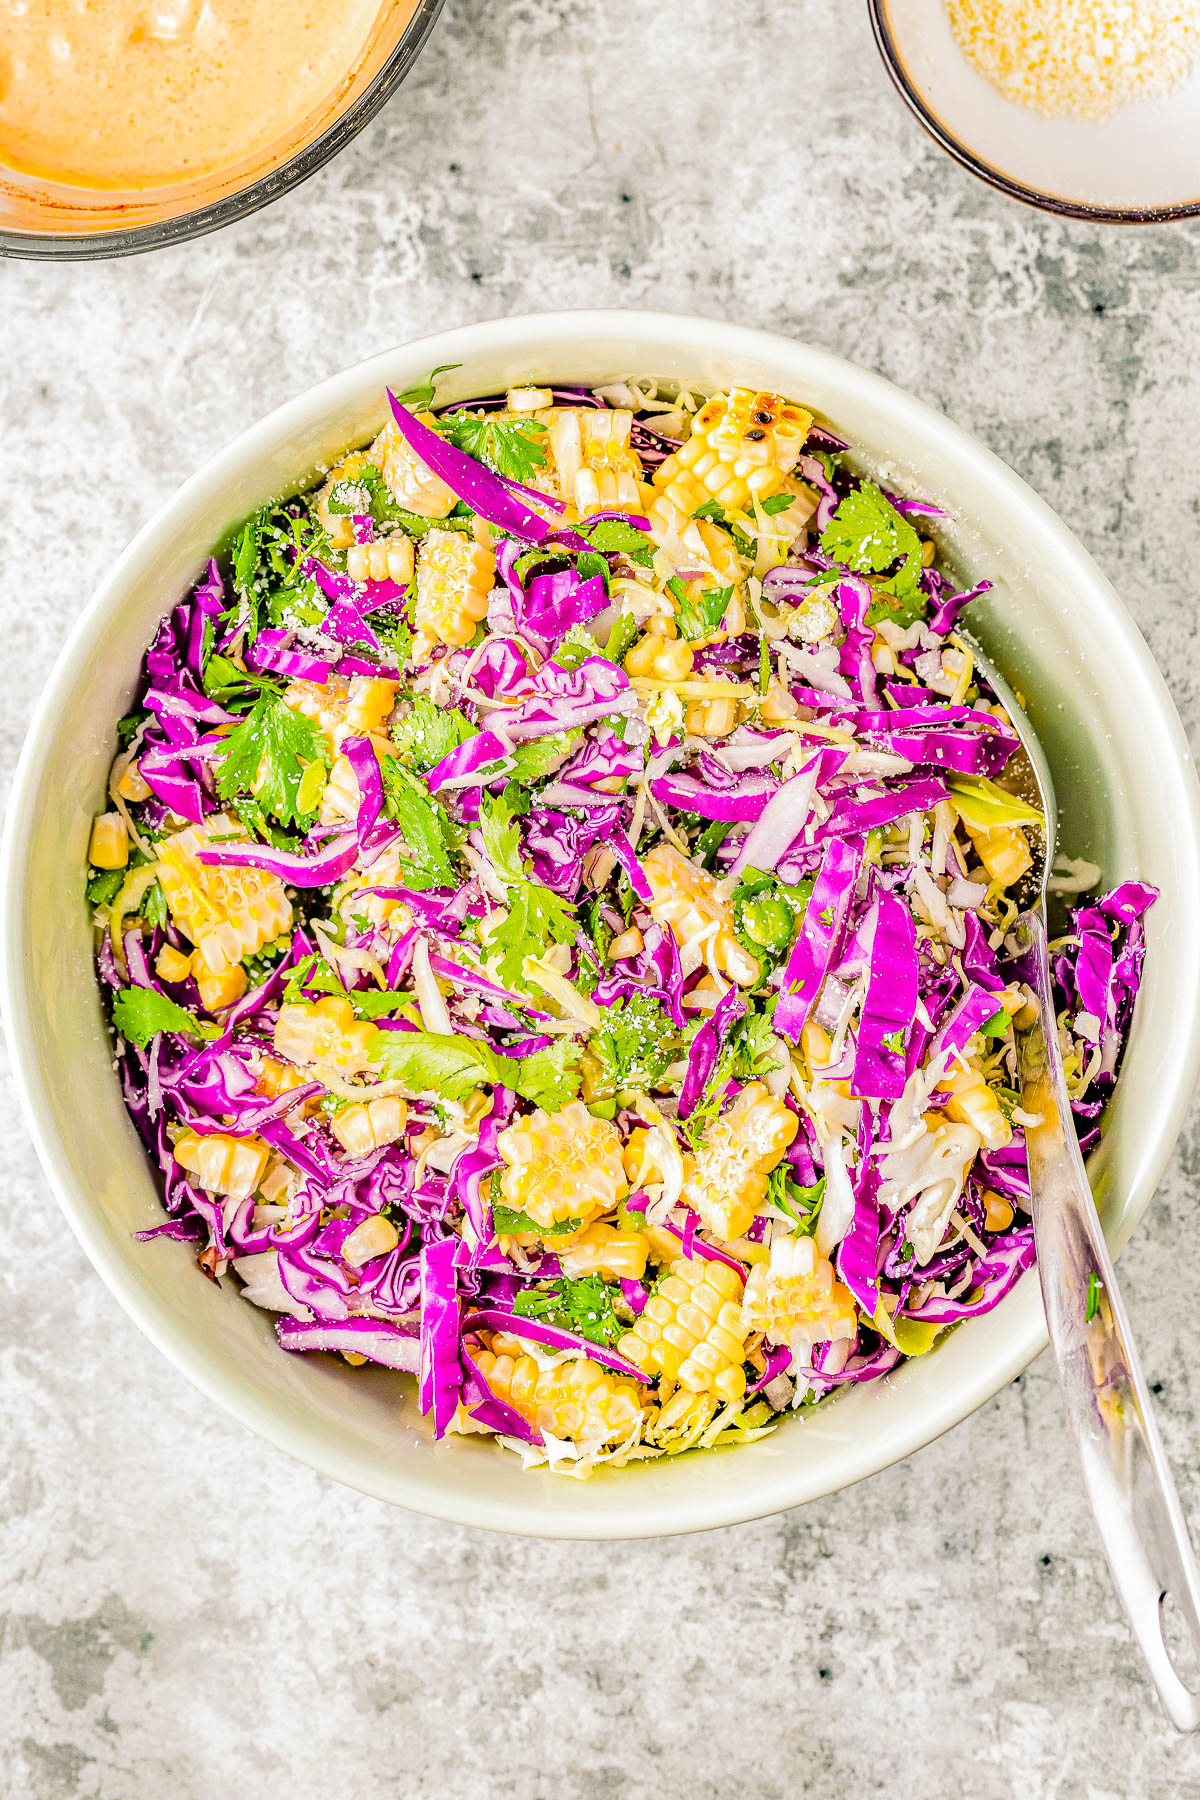 A bowl of vibrant salad containing red cabbage, carrots, herbs, and sesame seeds, with a spoon on the side and dressing in the background.